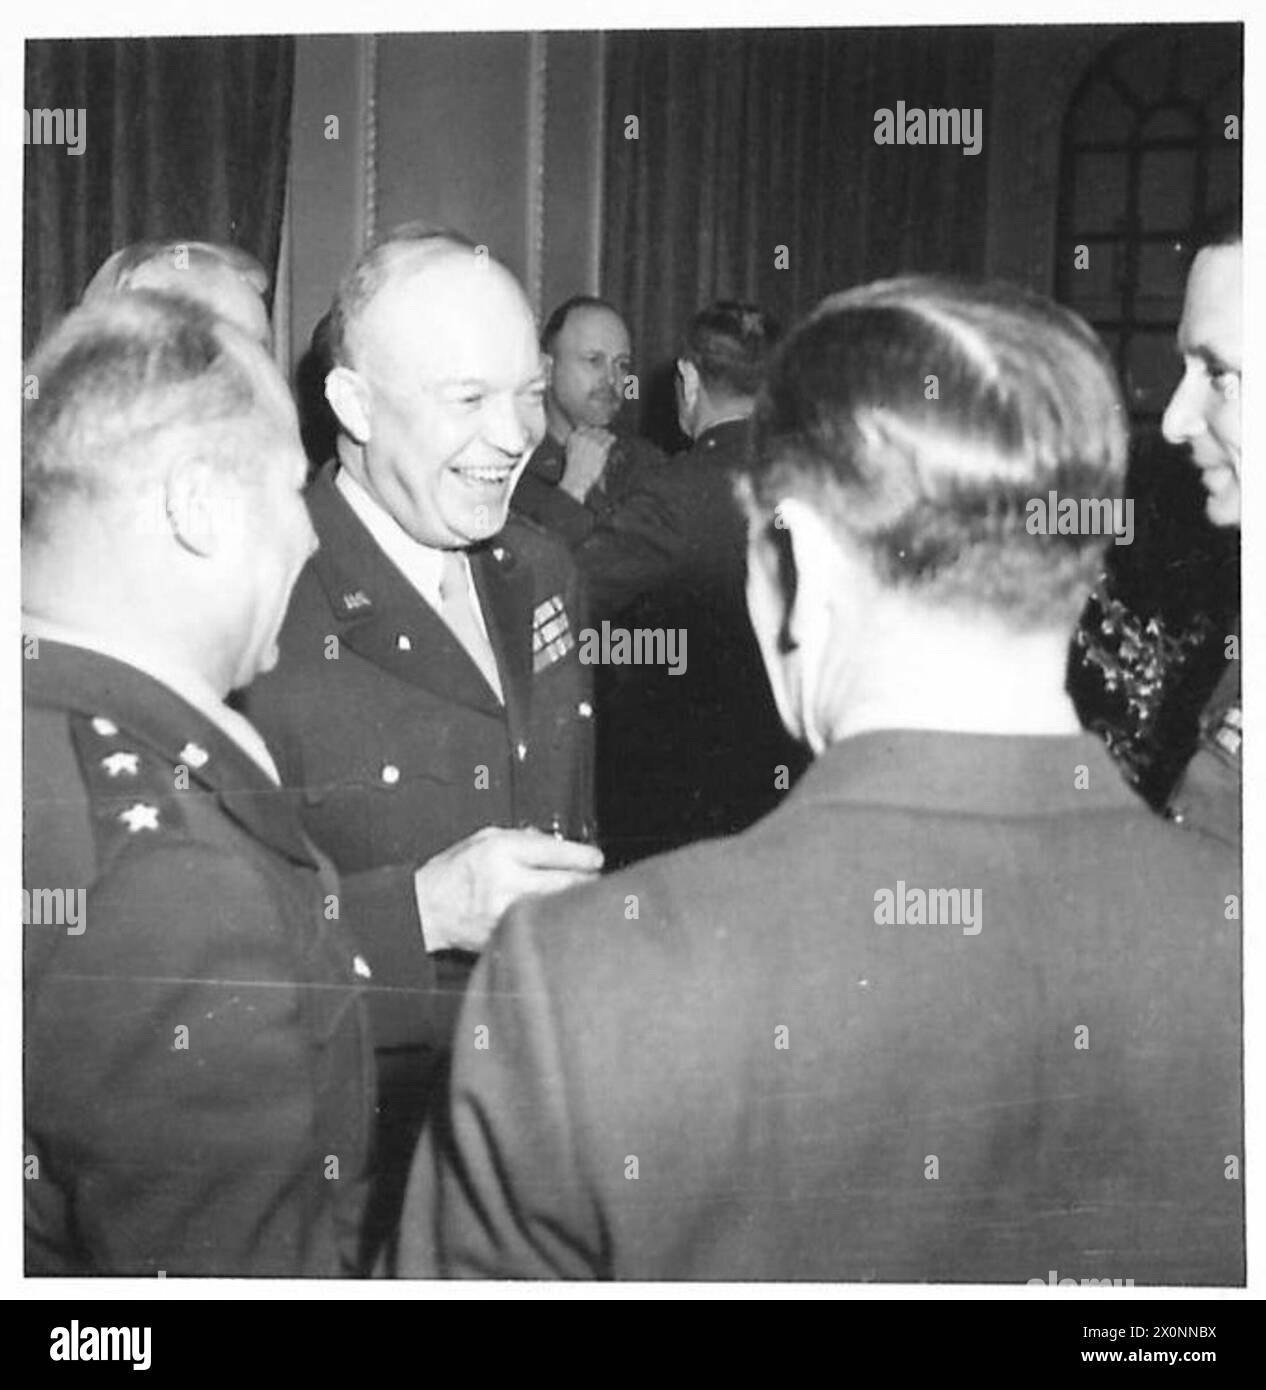 ANGLO-AMERICAN CO-OPERATION DINNER - Left to right - General Dwight D.Eisenhower talking to a group of officers Air Chief Marshall Sir Arthur Tedder [right]. Photographic negative , British Army Stock Photo